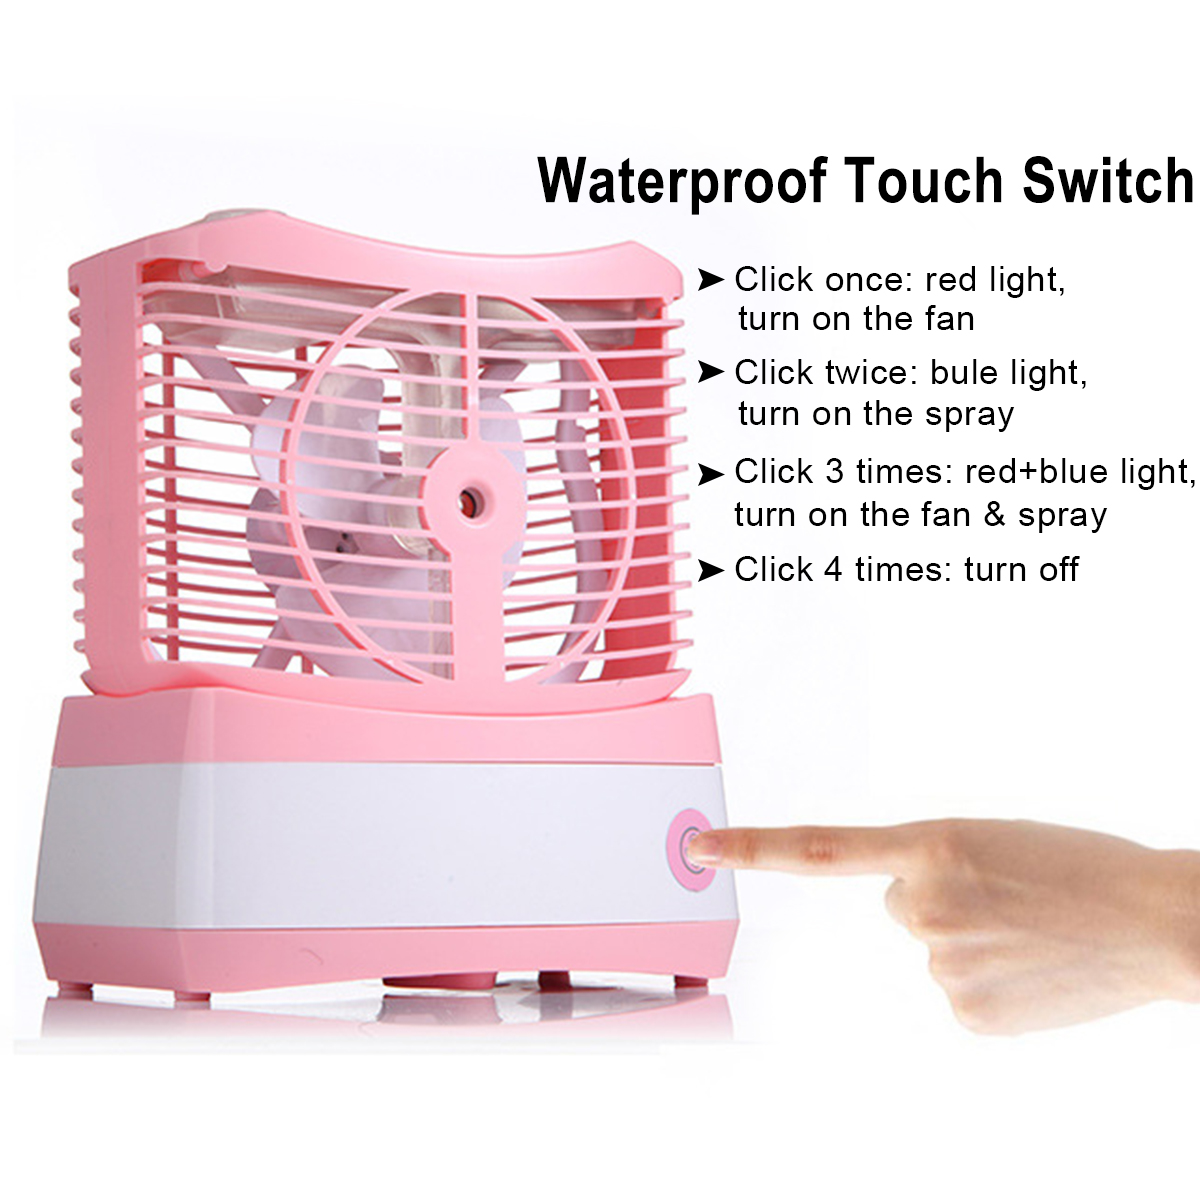 USB-Portable-Mini-ABS-Fan-Cooling-Desktop-Air-Conditioner-Fan-Humidified-Foggy-1419352-1